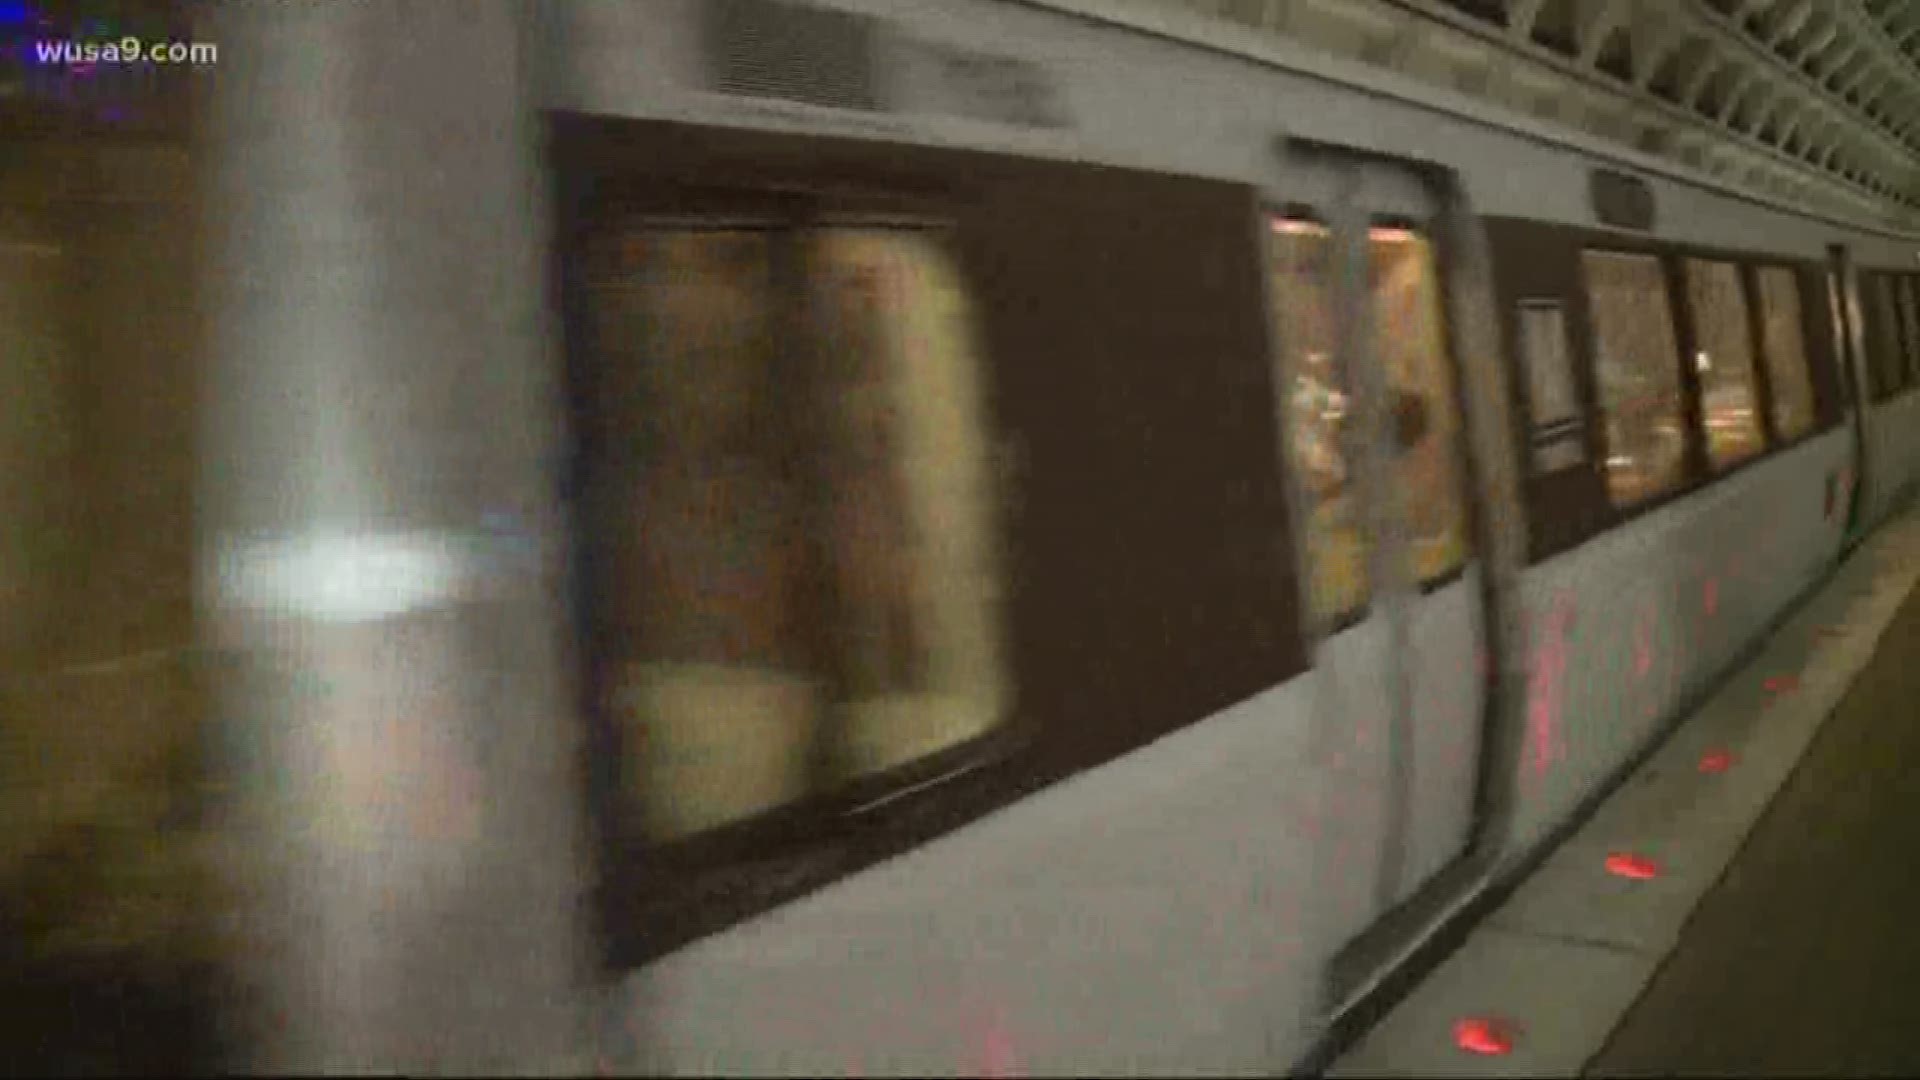 You may have noticed less Metro trains and longer waits today. That's because Metro pulled all 3000 trains from service overnight to try and figure out what caused a door malfunction.